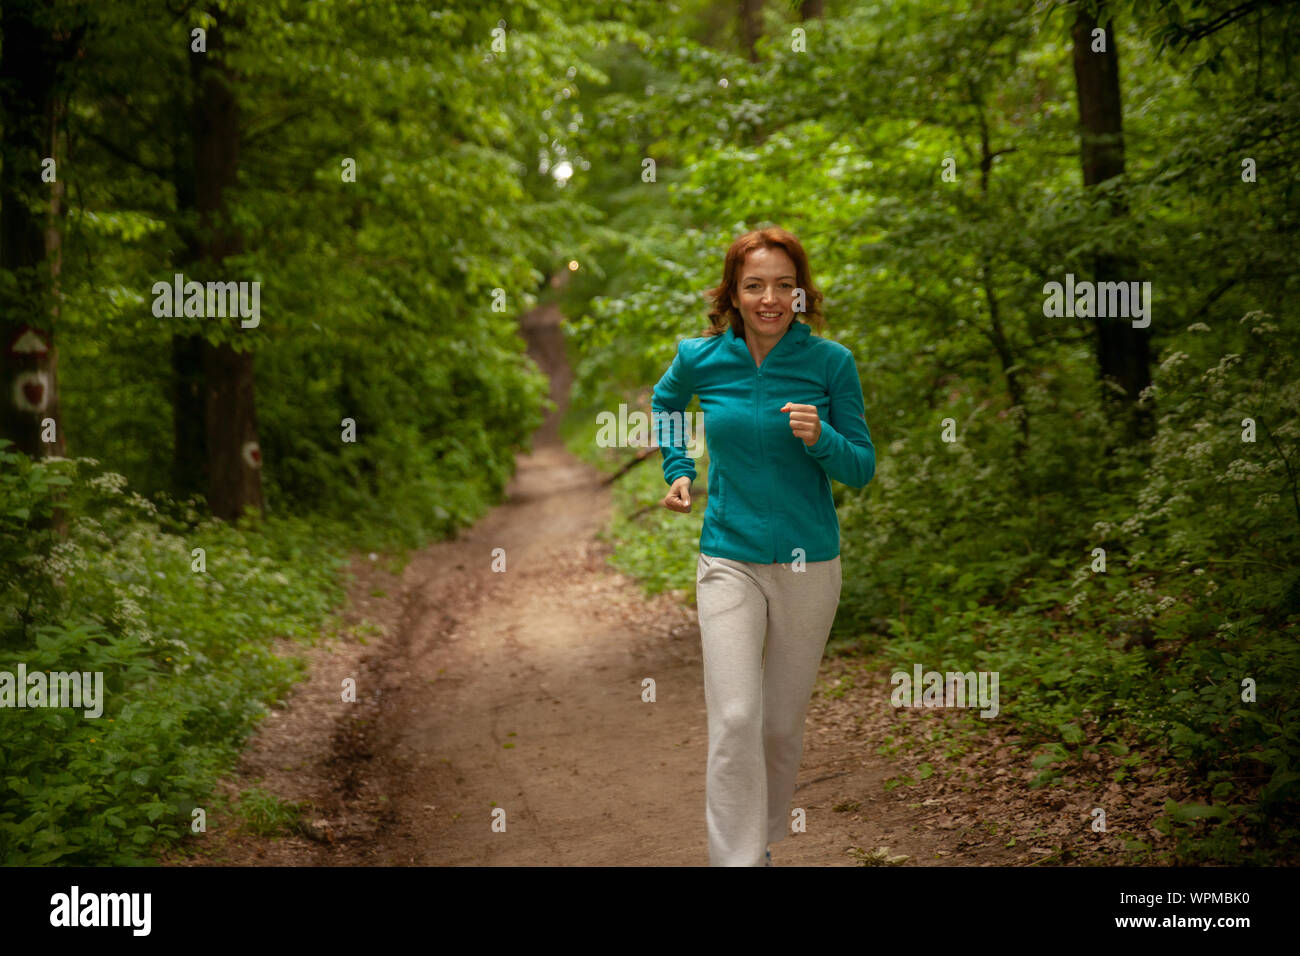 One mature woman, 40-45 years old, jogging in a forest outdoors, in nature. Wearing sport clothing in Spring. Stock Photo